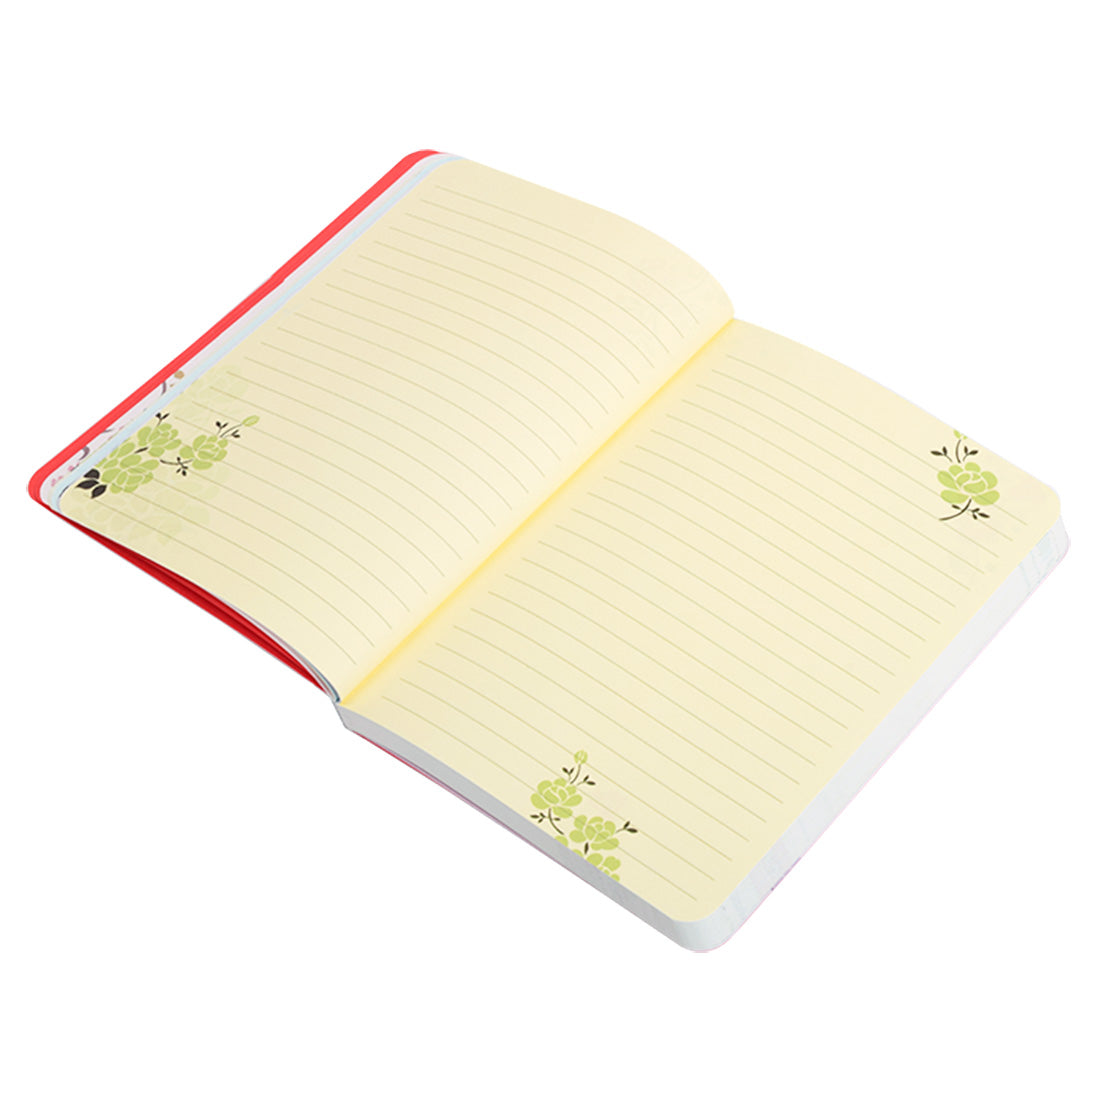 Initial X - Floral Monogram Notebook